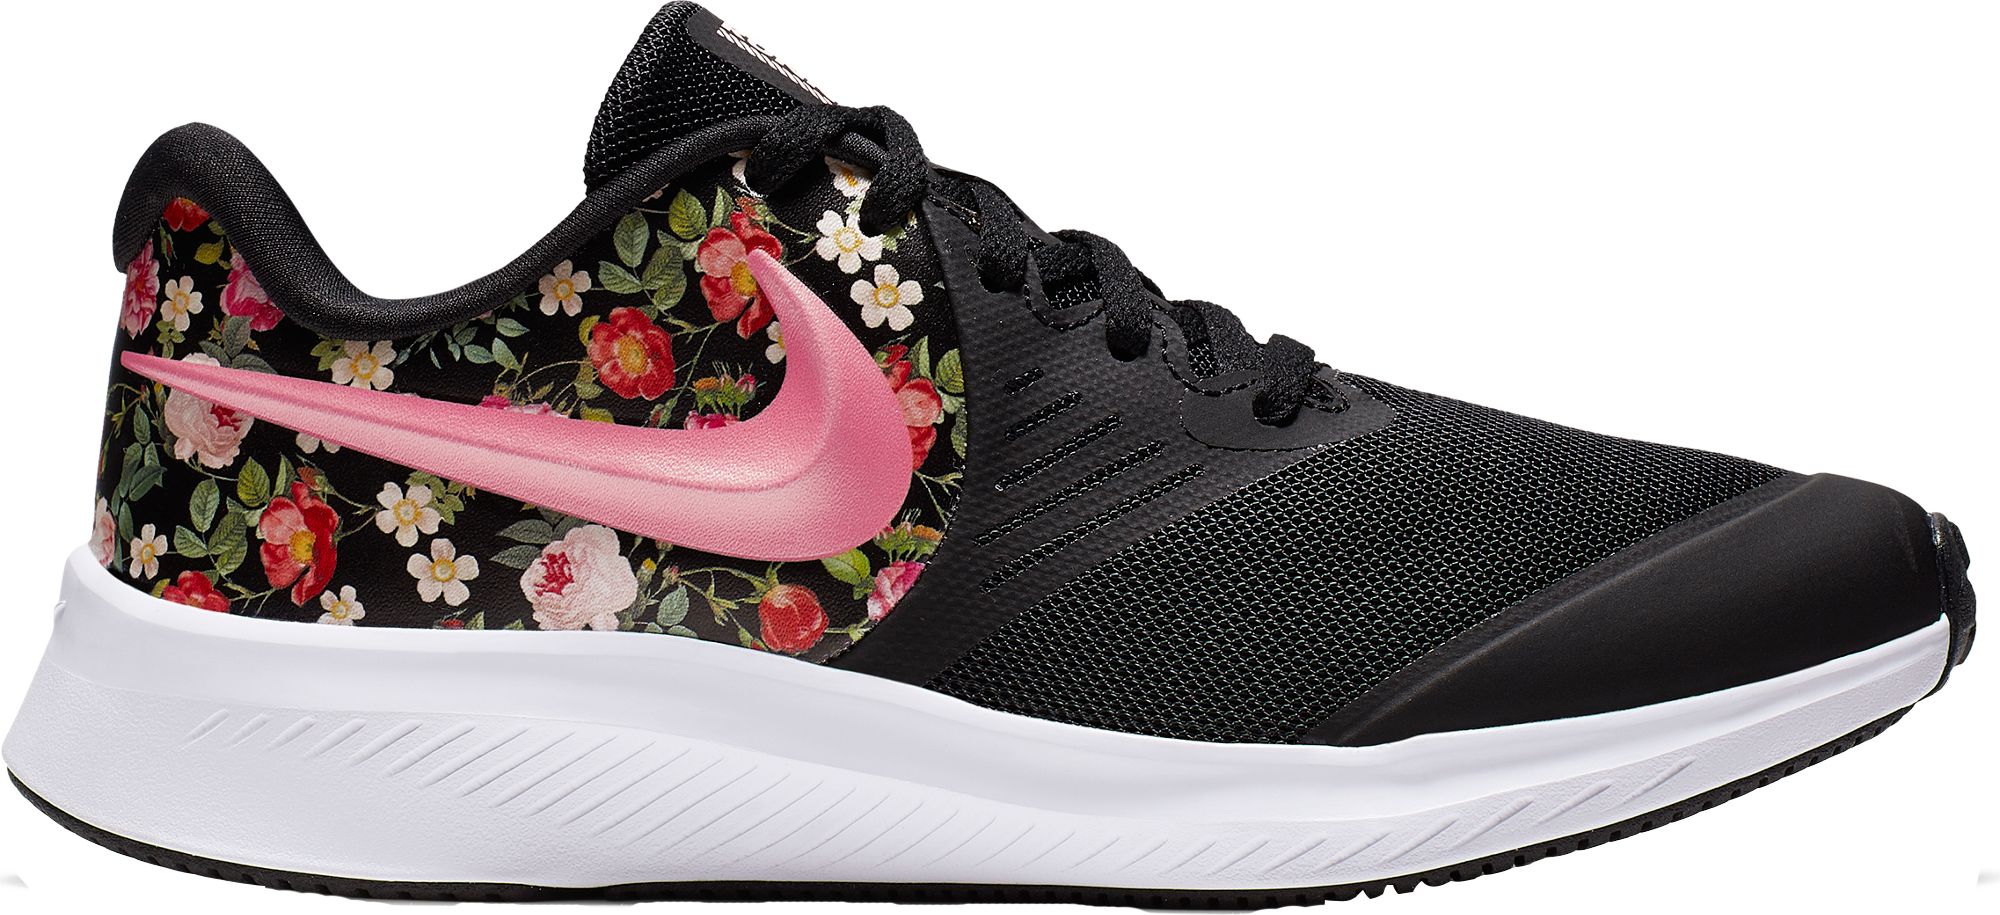 black nike shoes with flowers